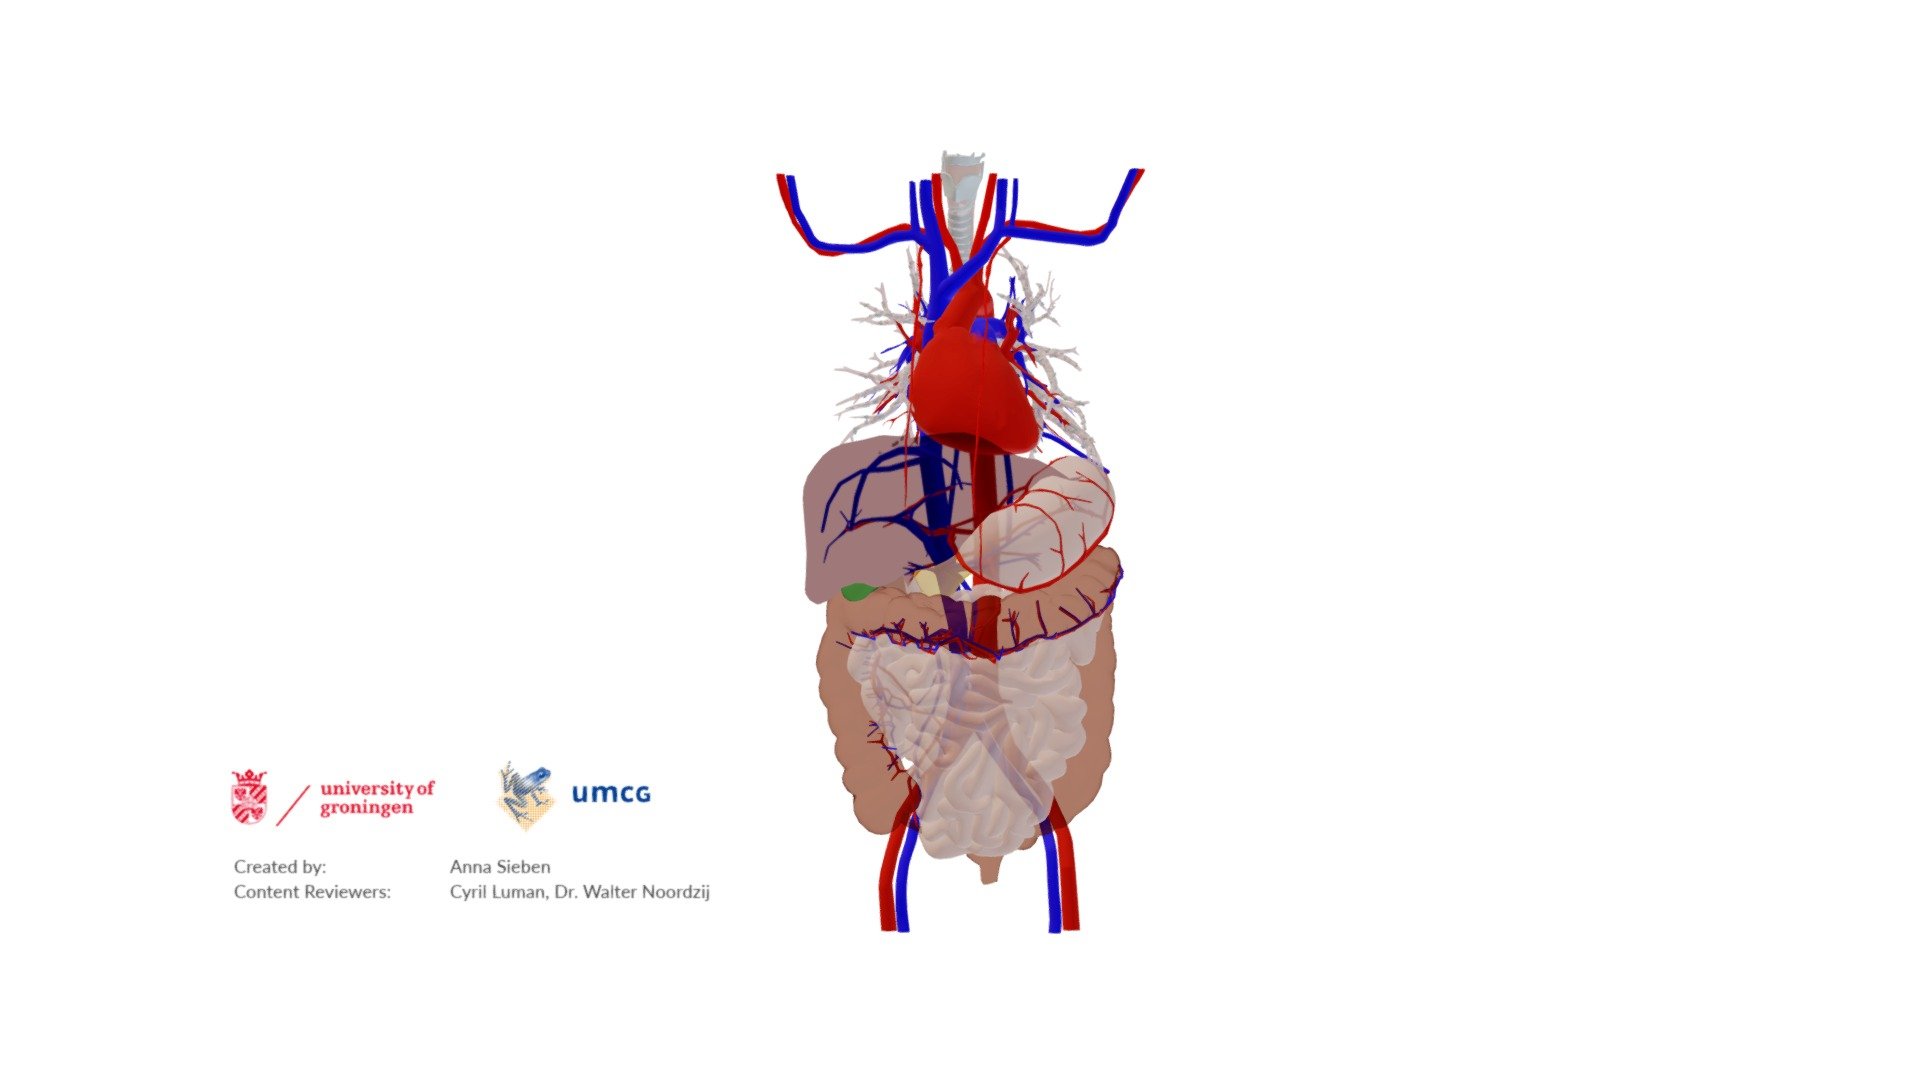 Thorax and abdomen: some arteries and veins